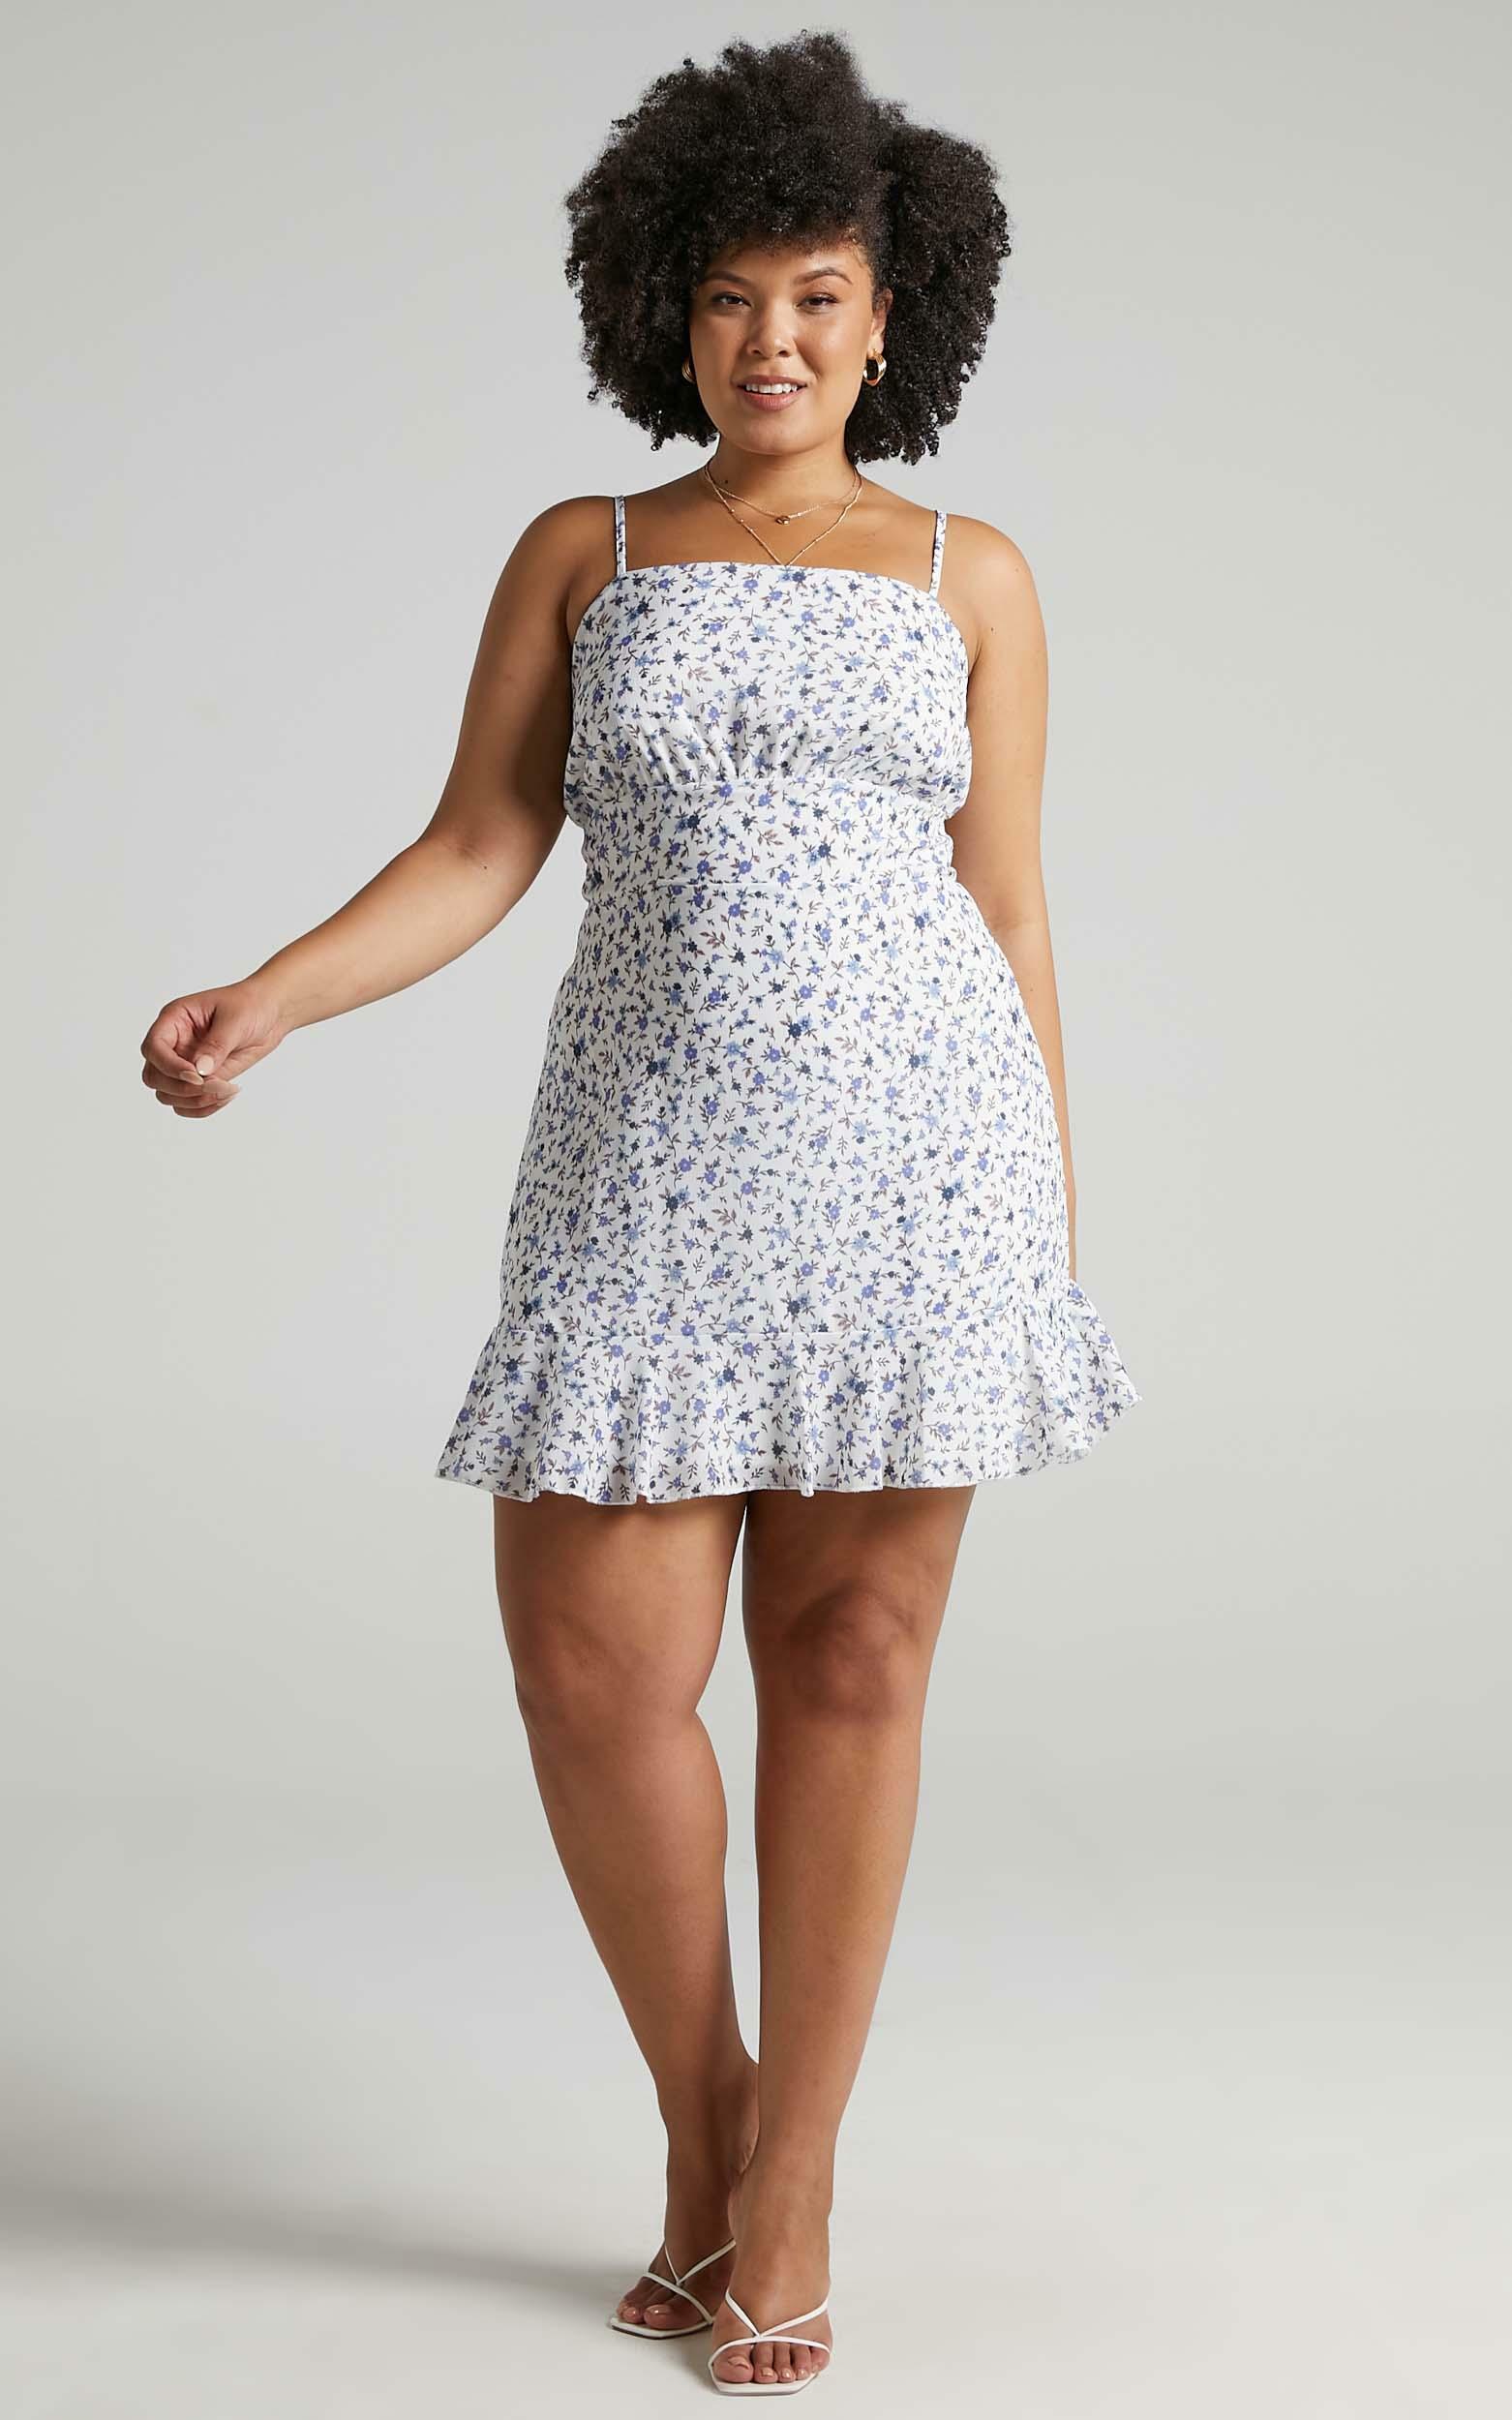 Falling In Love Dress in White Floral - 20, WHT3, hi-res image number null